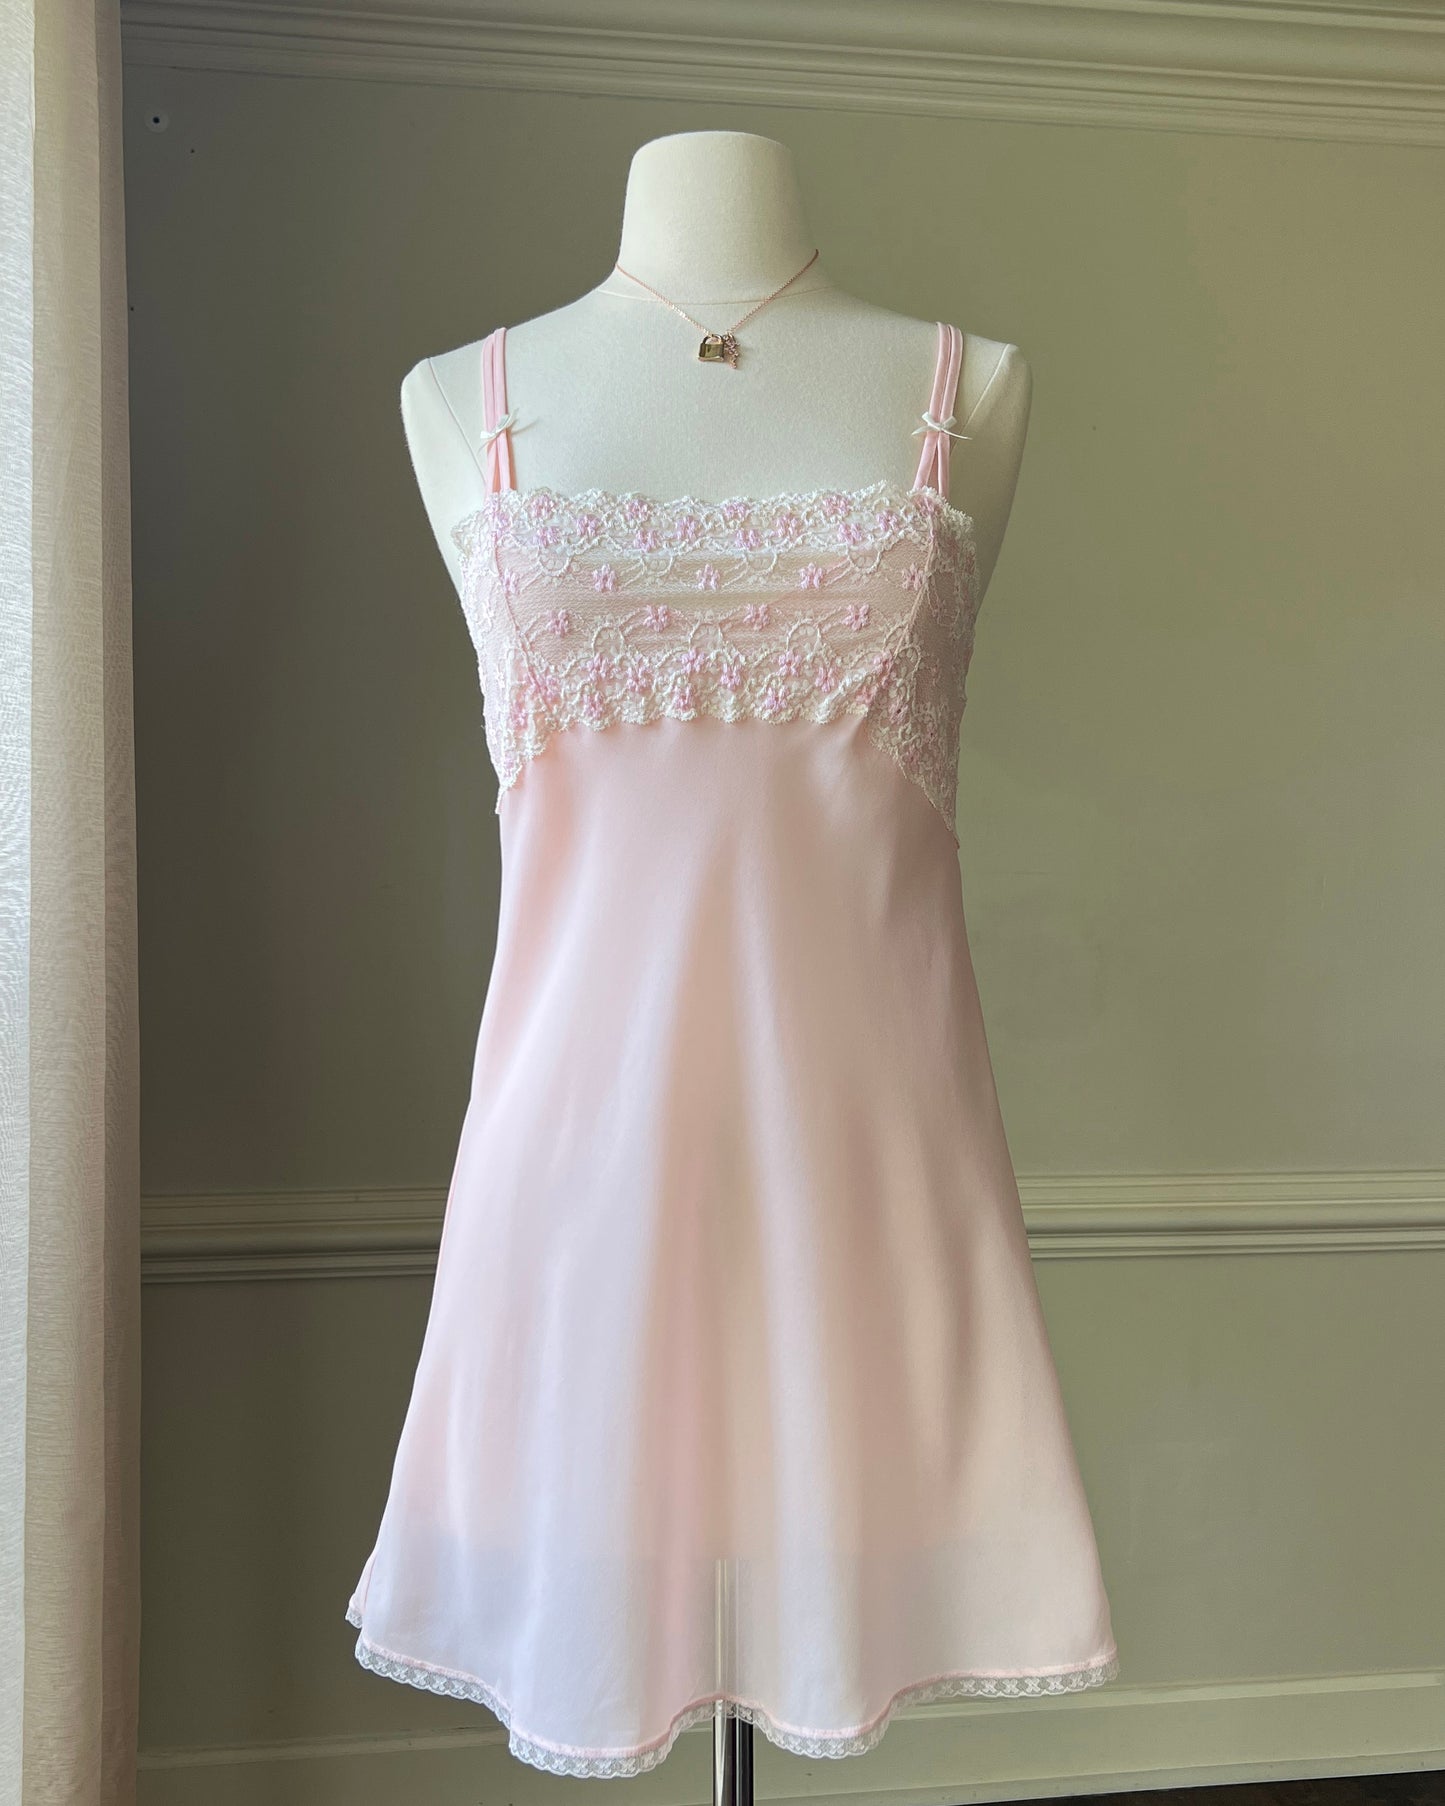 Babydoll Slip Dress featuring Daisy Embroidery Bustier